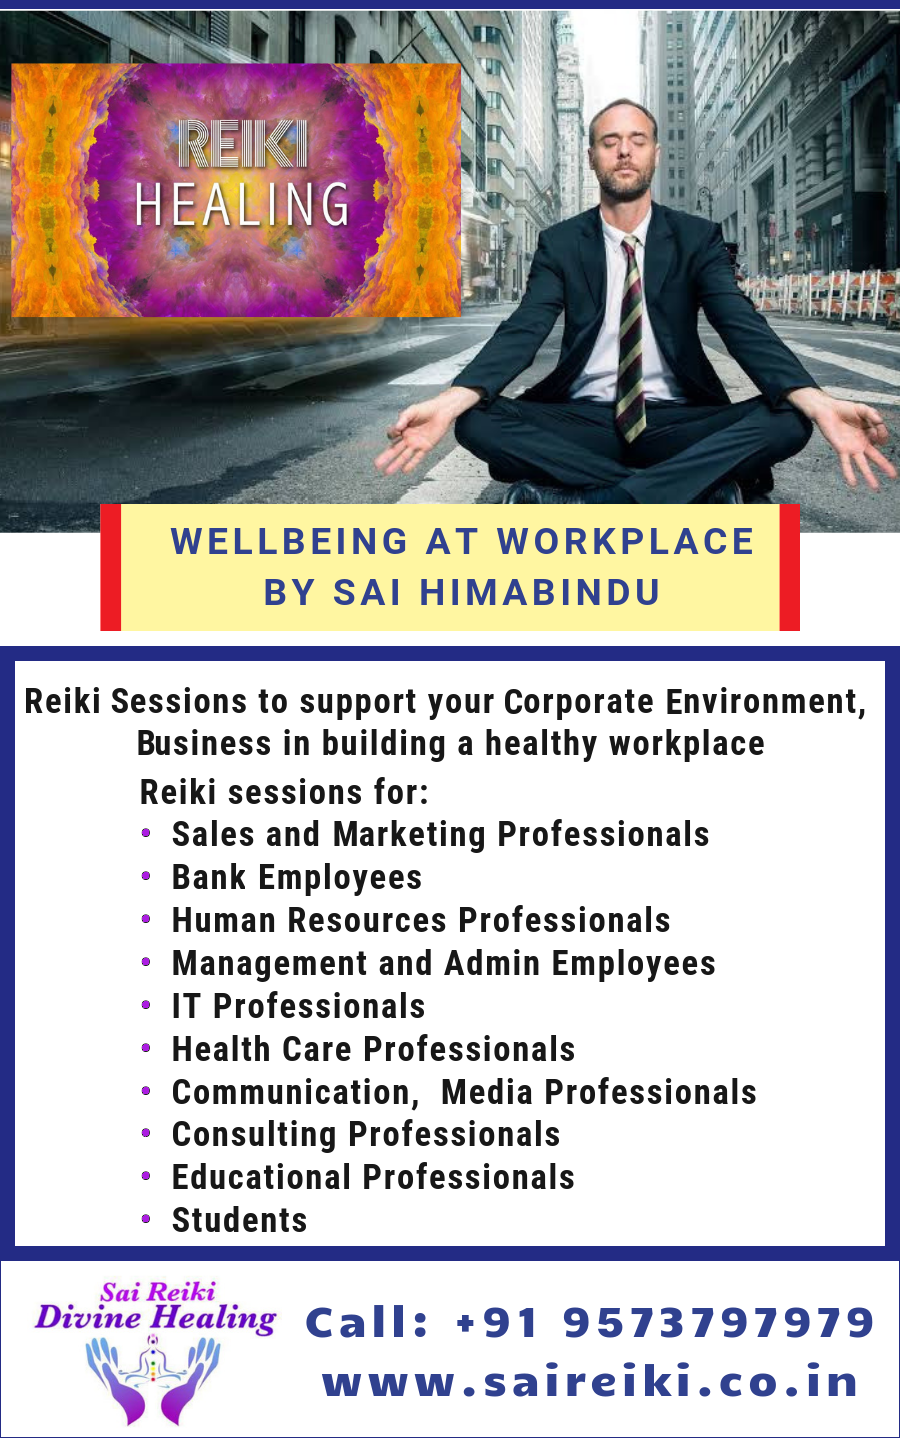 Wellbeing and Stress Management at workplace by Sai Hima Bindu - Ahmedabad